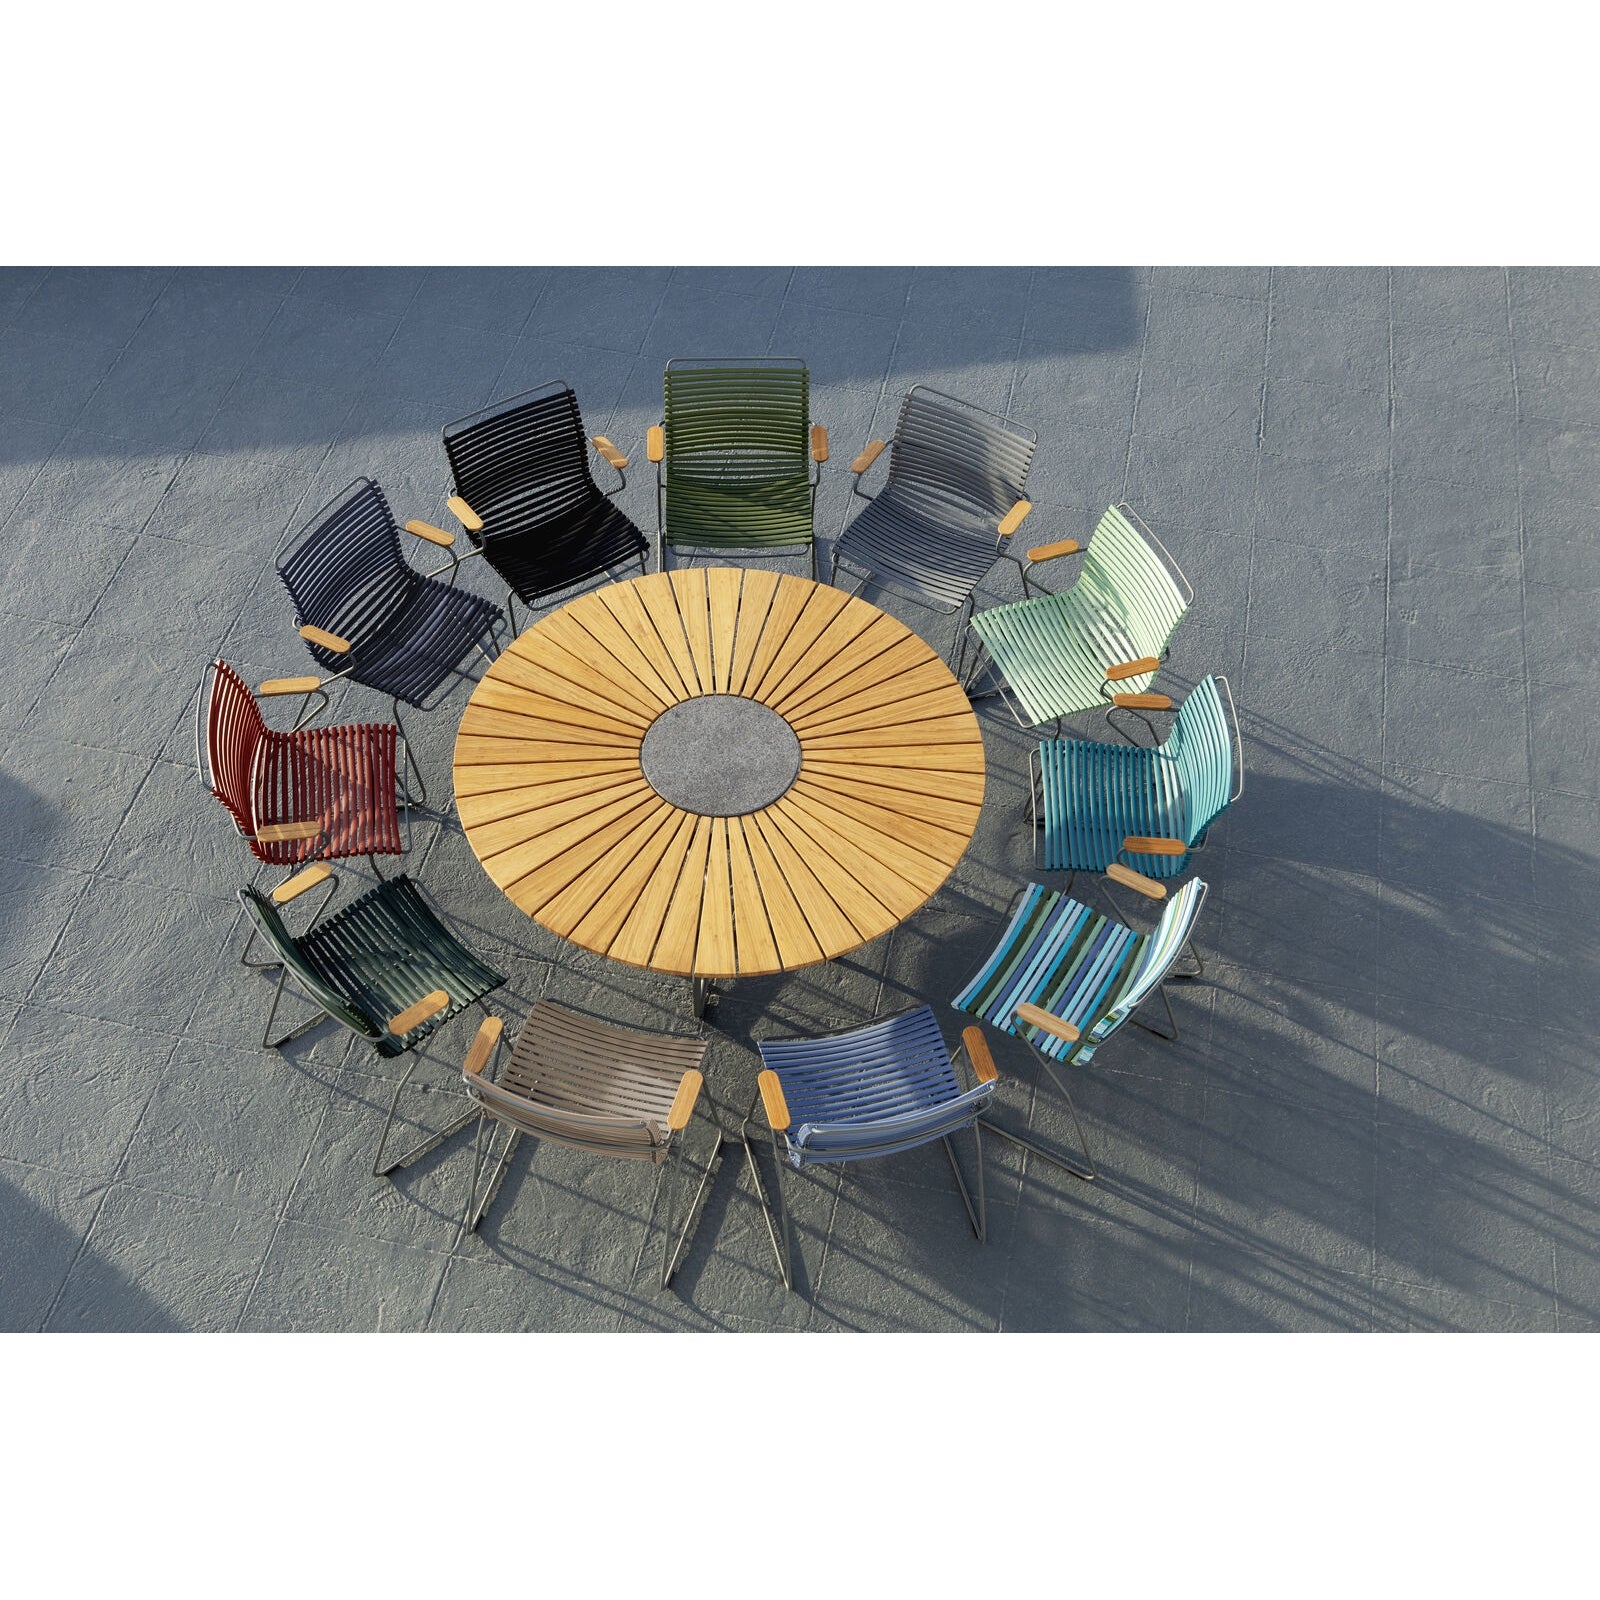 HOUE Click Outdoor Dining Chairs - Your Choice of 3 colors -Danish Design